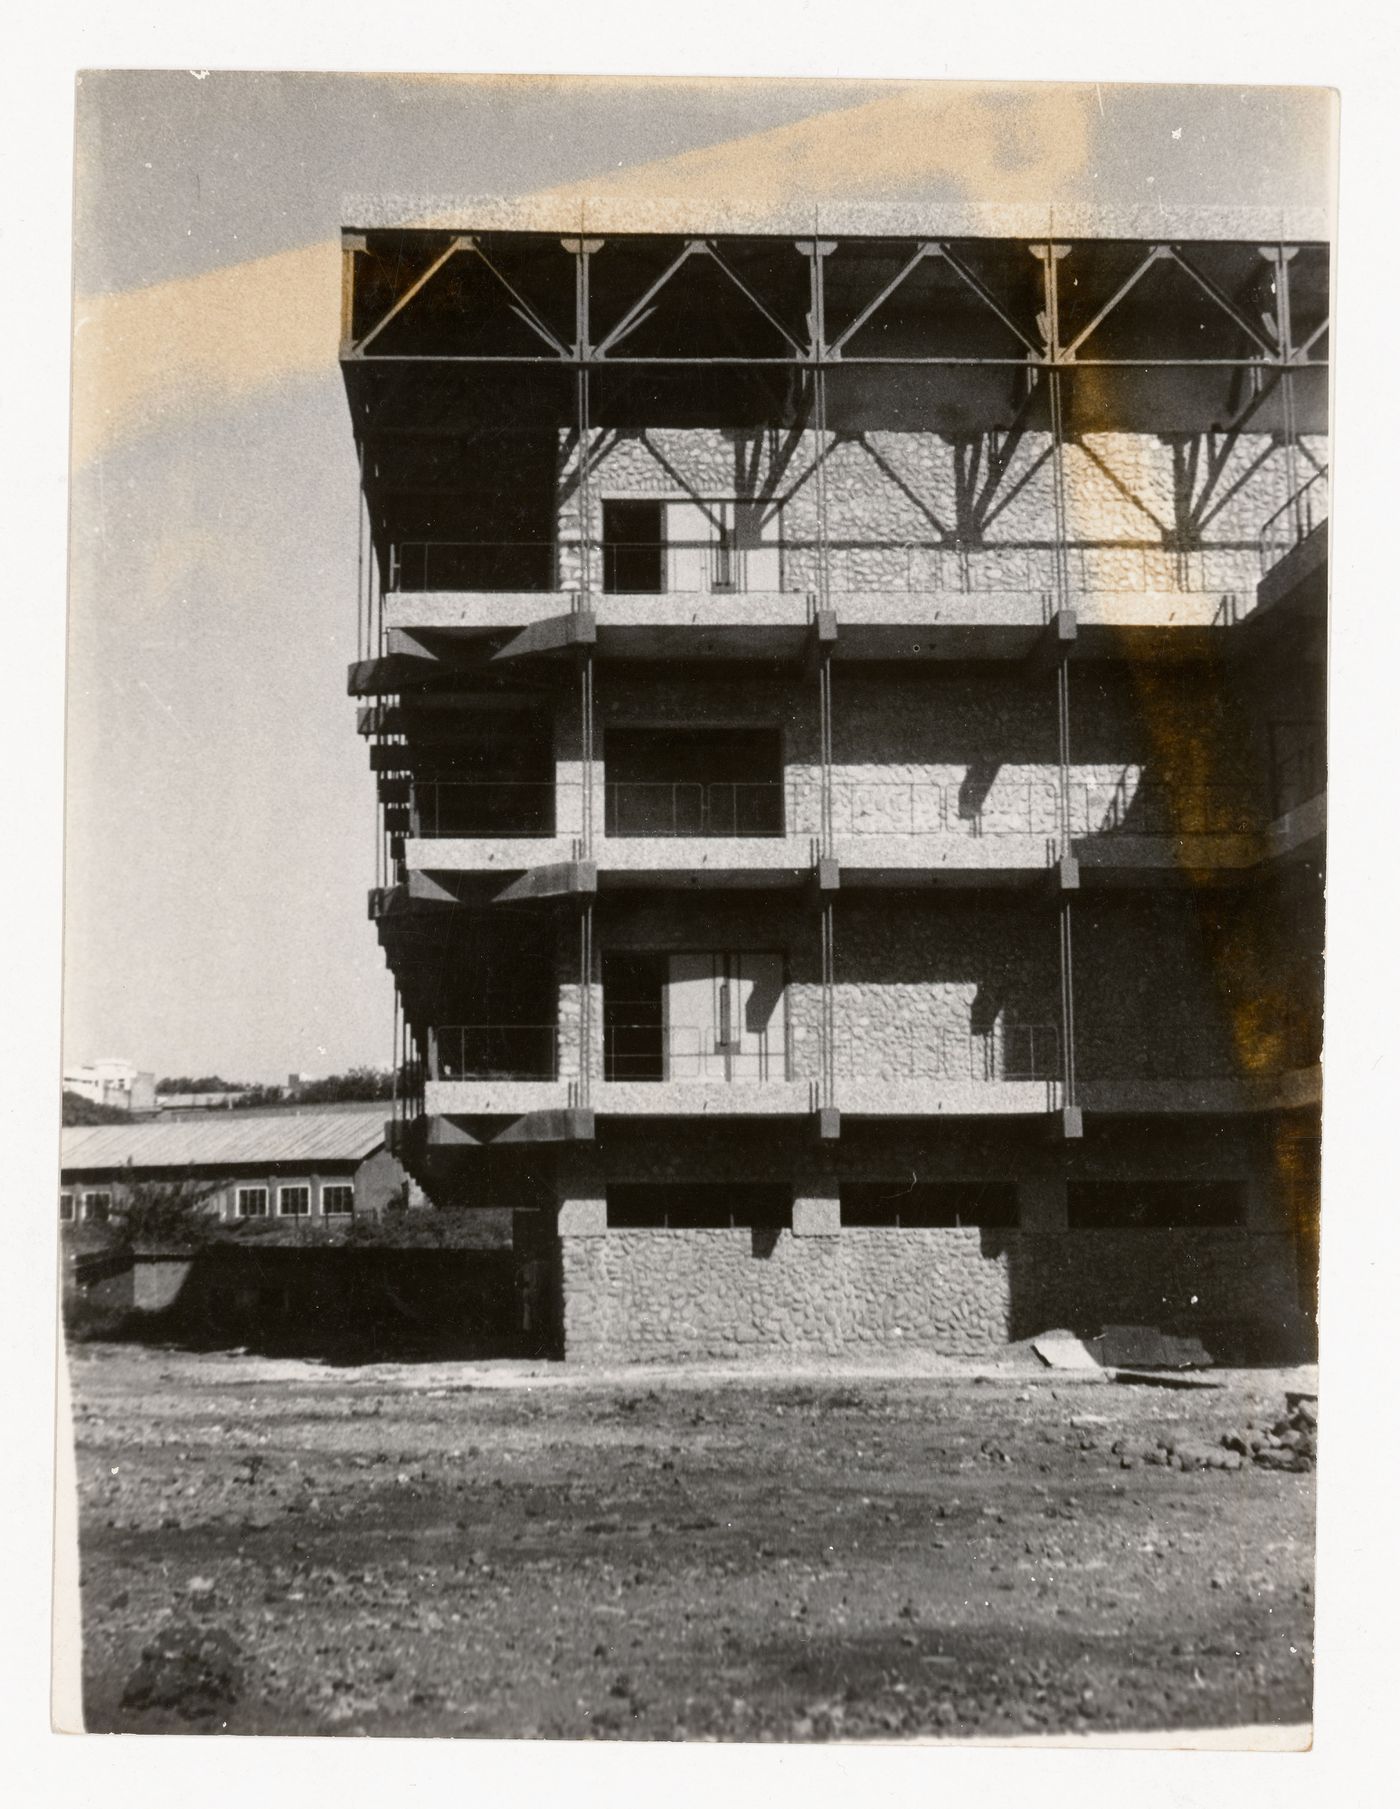 Photograph of the Theatre under construction for J&K Academy project, Jammu, India